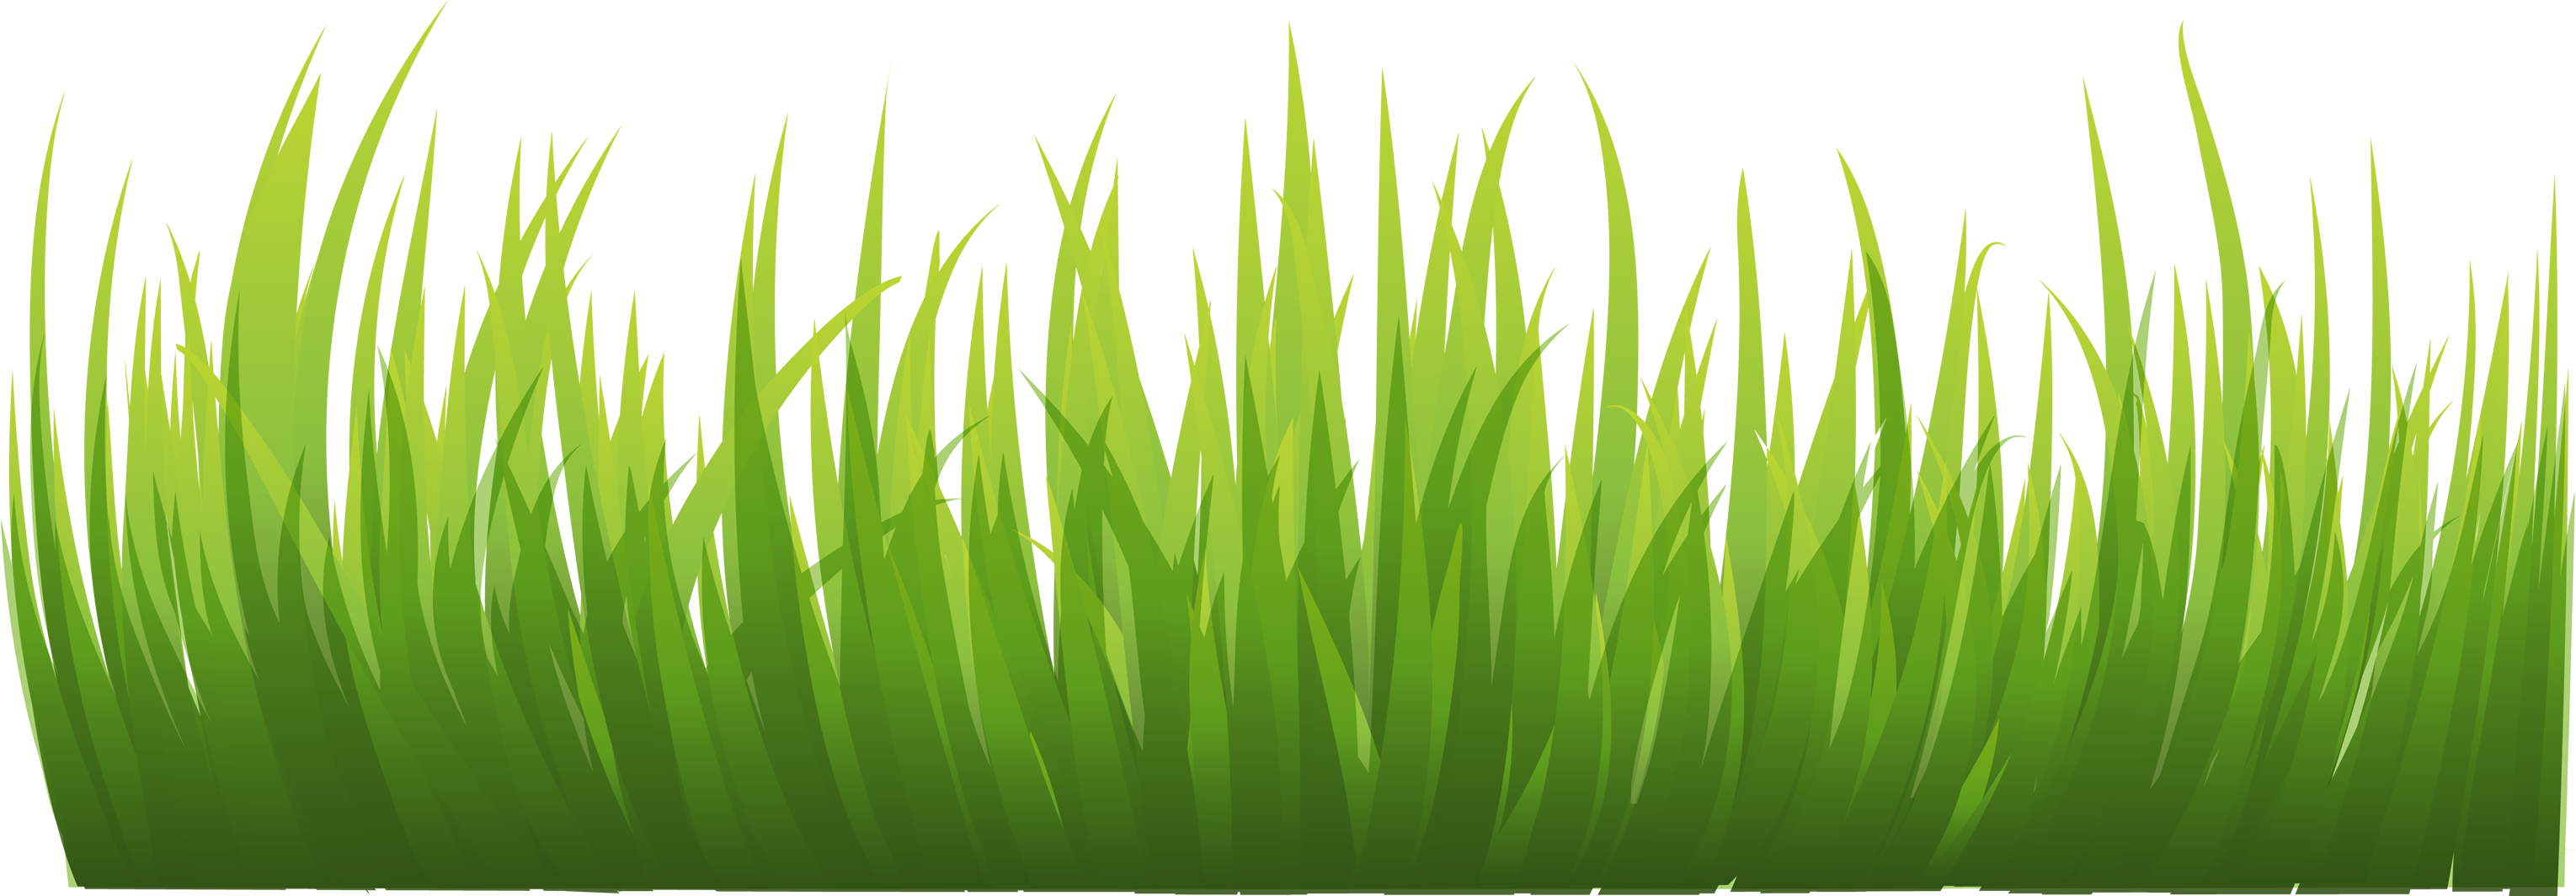 Grass png image, green grass png picture #44856 - Free Icons and PNG